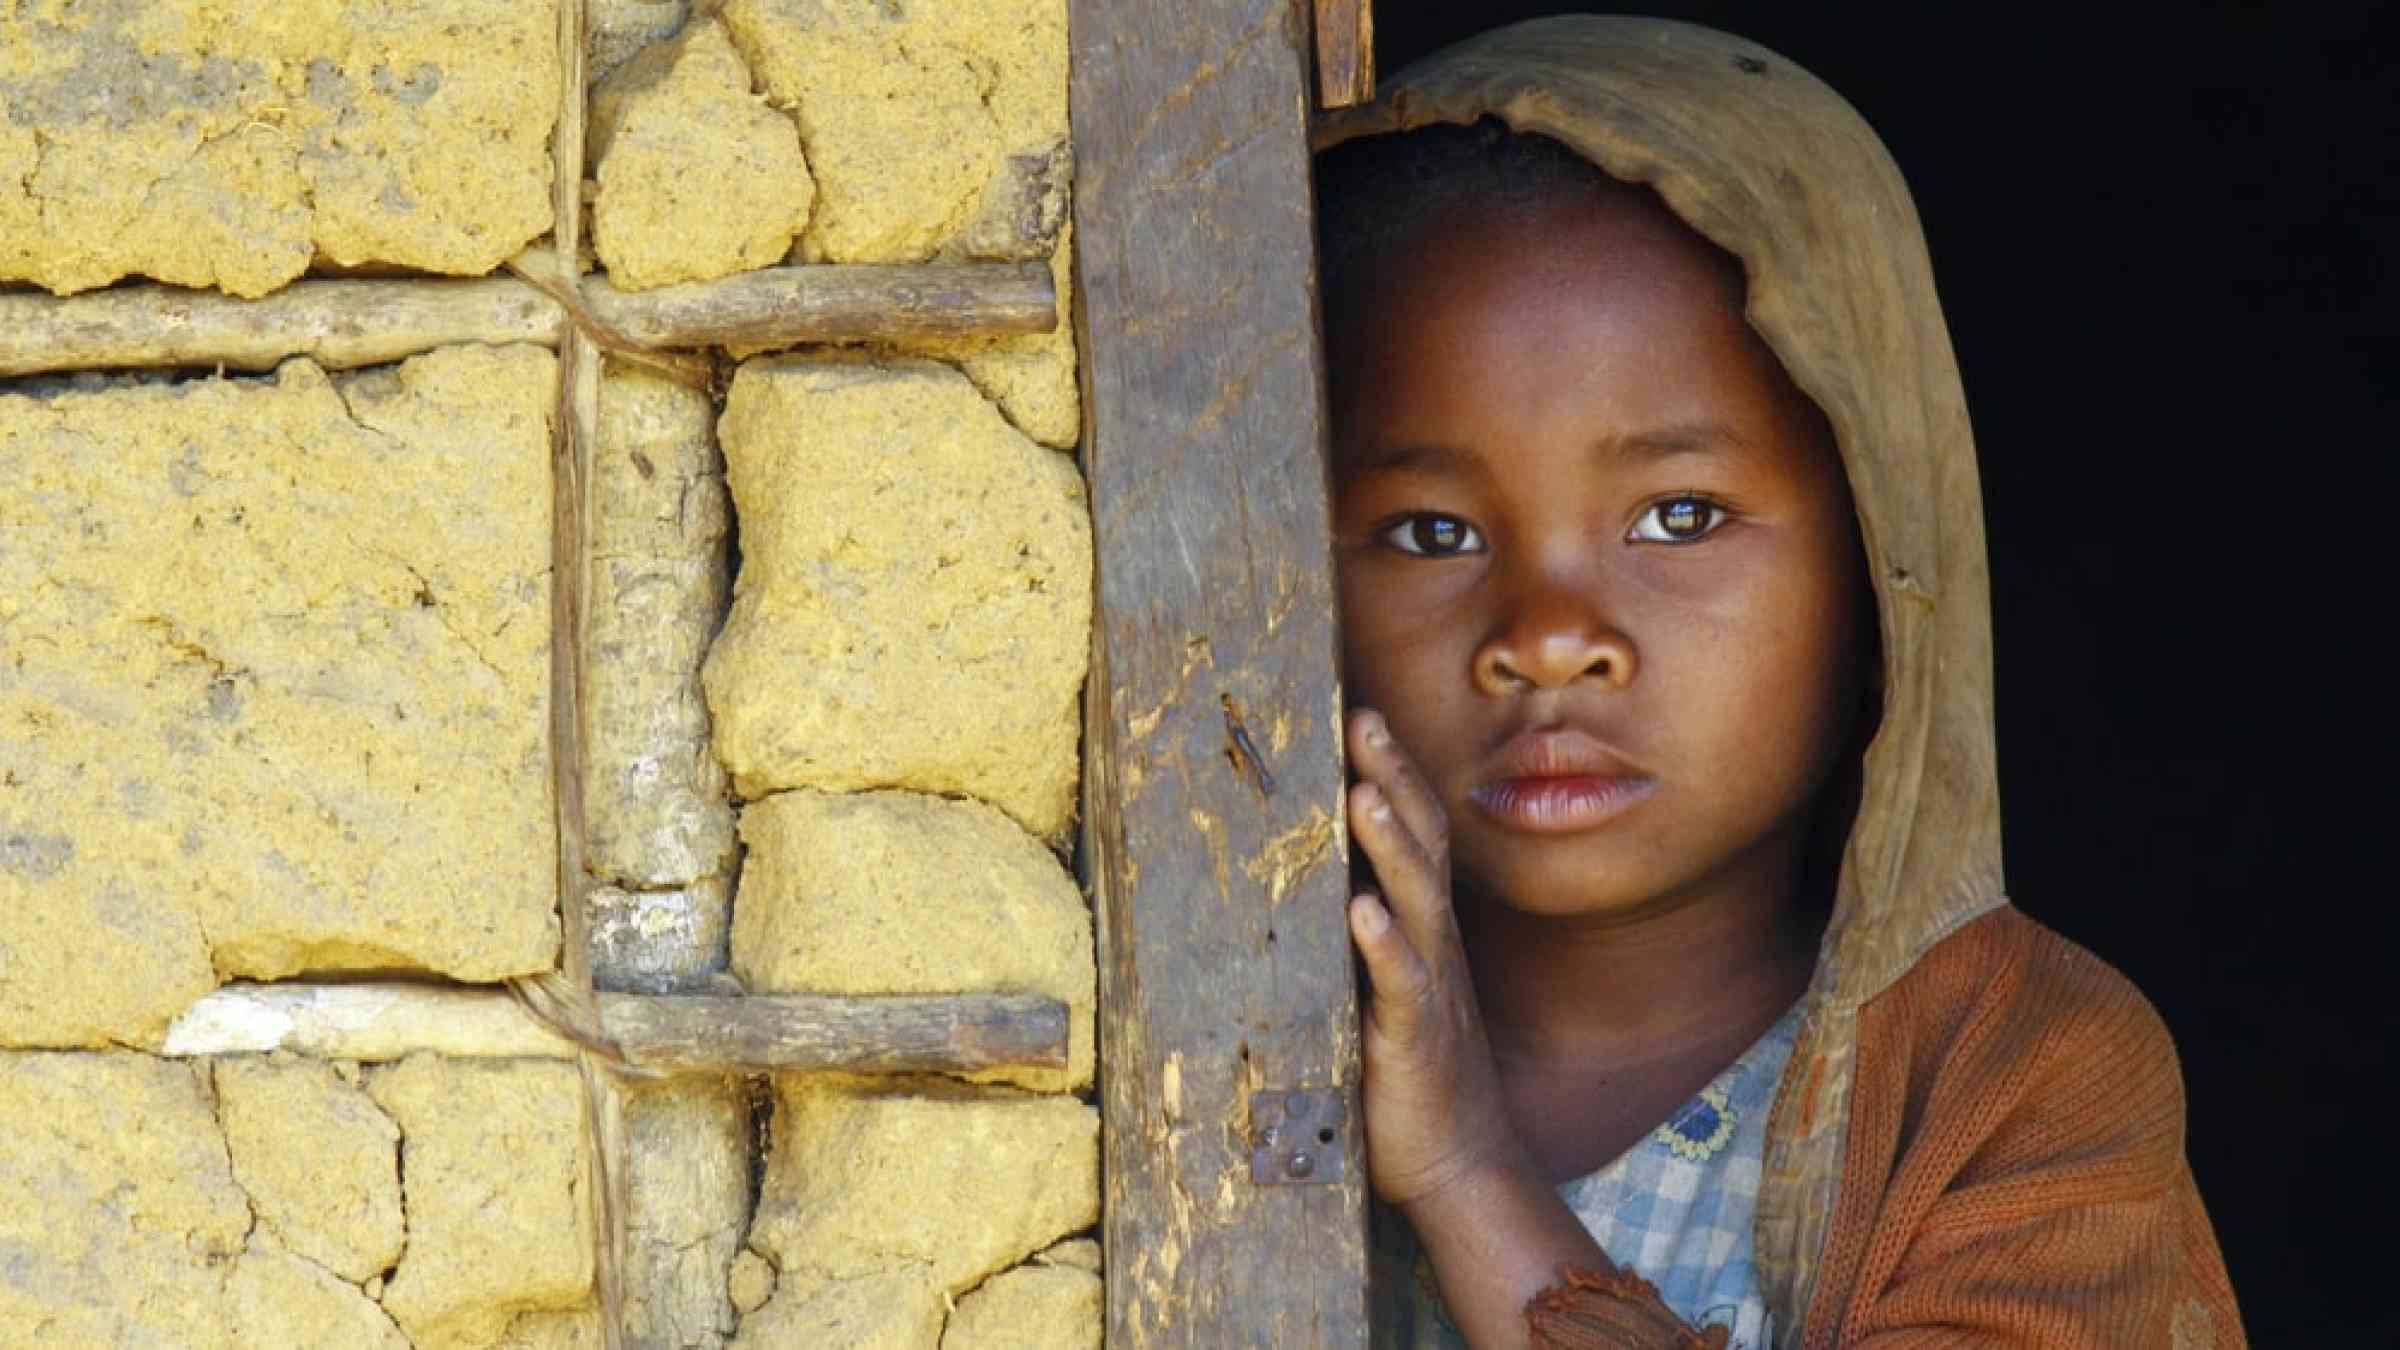 Young child standing inside the doorframe of a house in Madagascar, Africa.